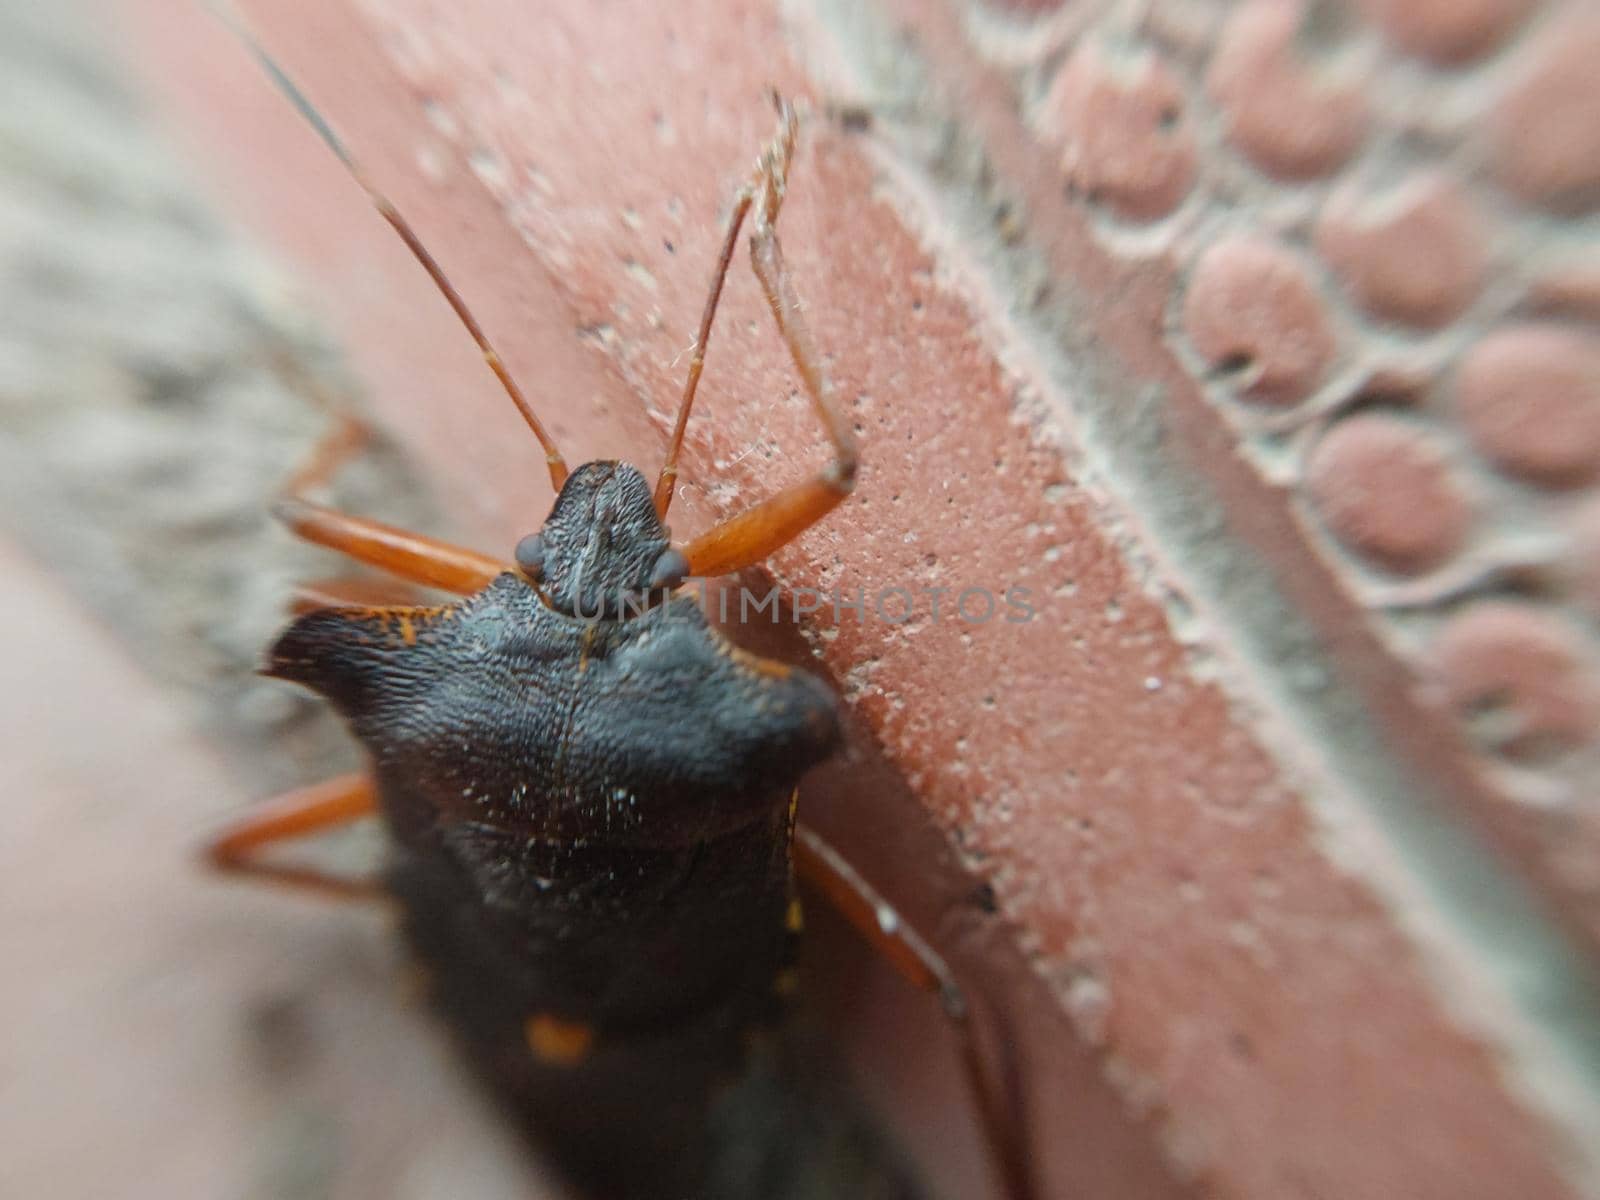 Beetle crawling on concrete tiles by architectphd